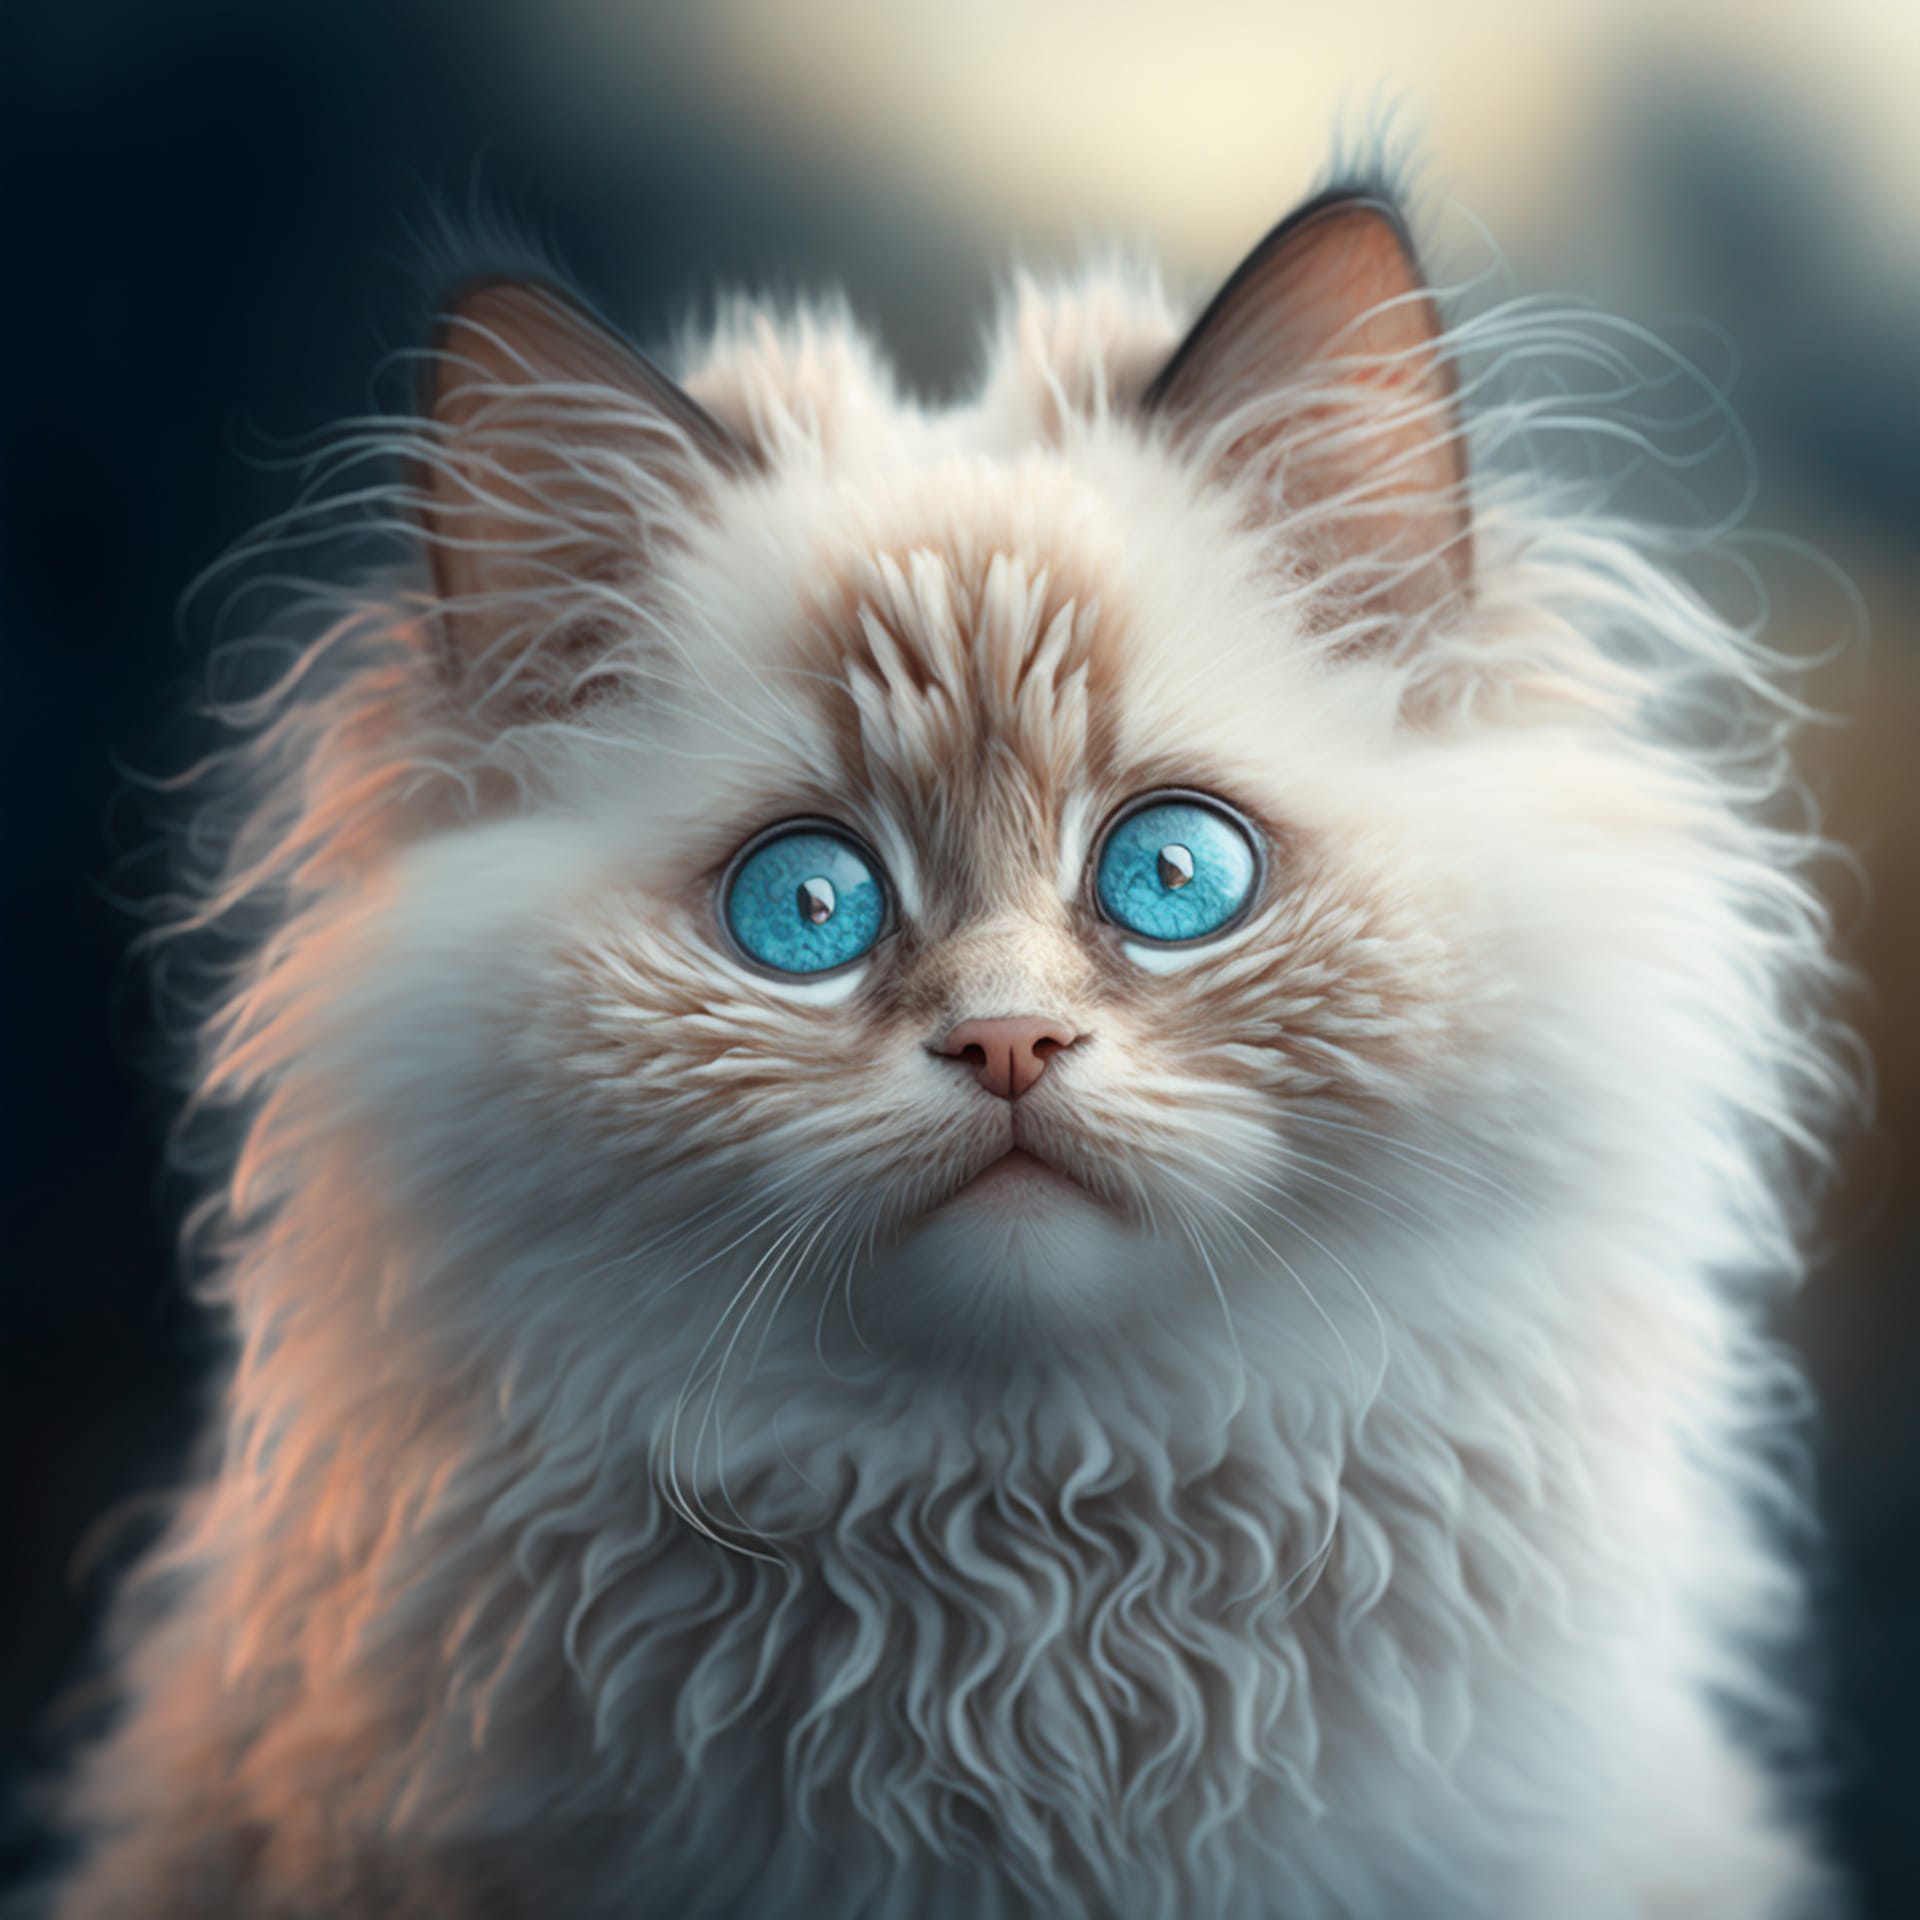 Fluffy cat with blue eyes seems be closed mesmerizing image